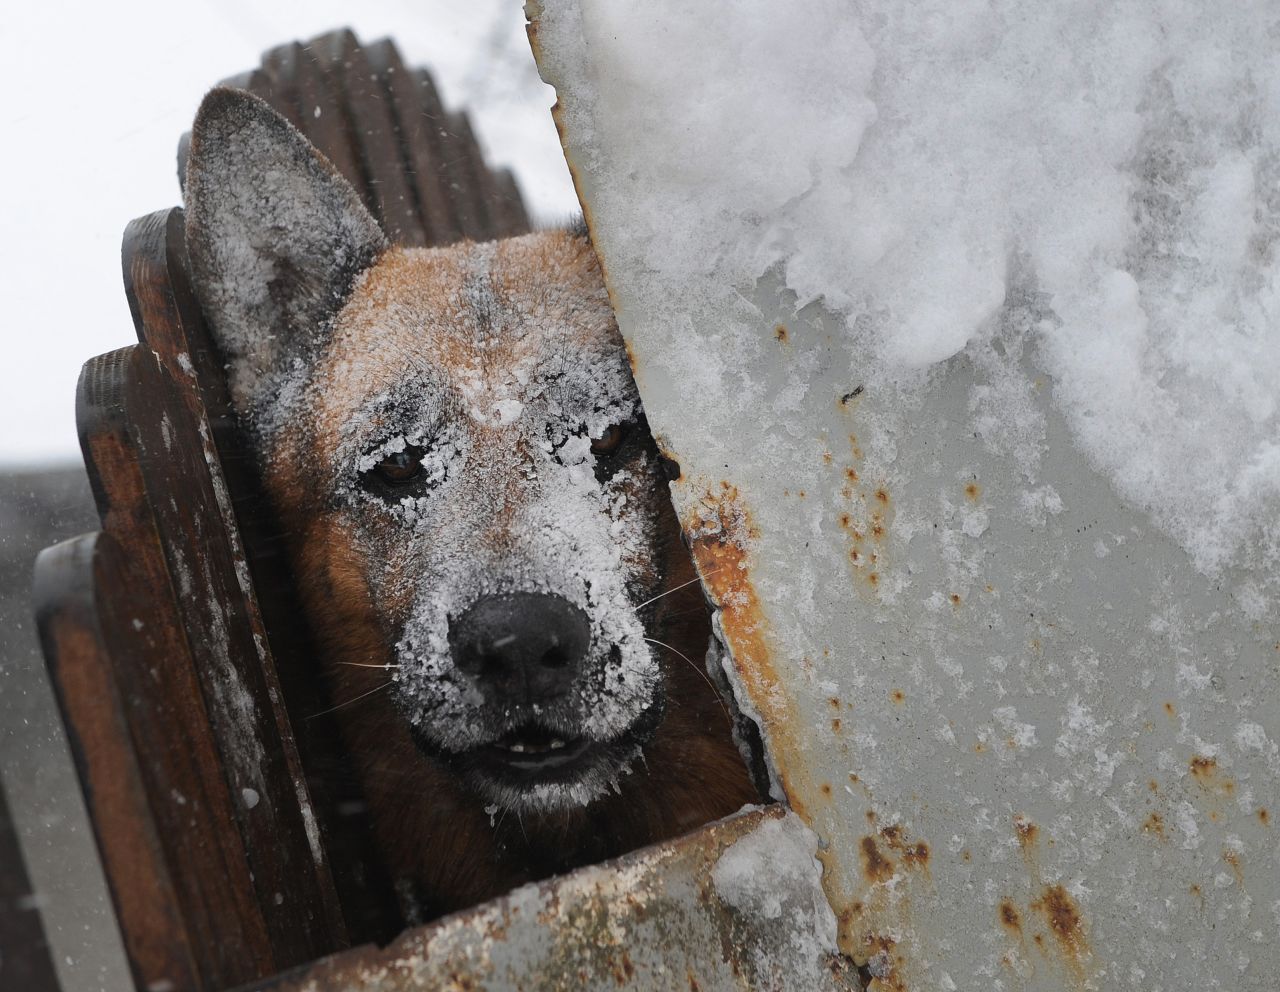 A dog takes shelter from a blizzard in Catelu, Romania, on January 26.